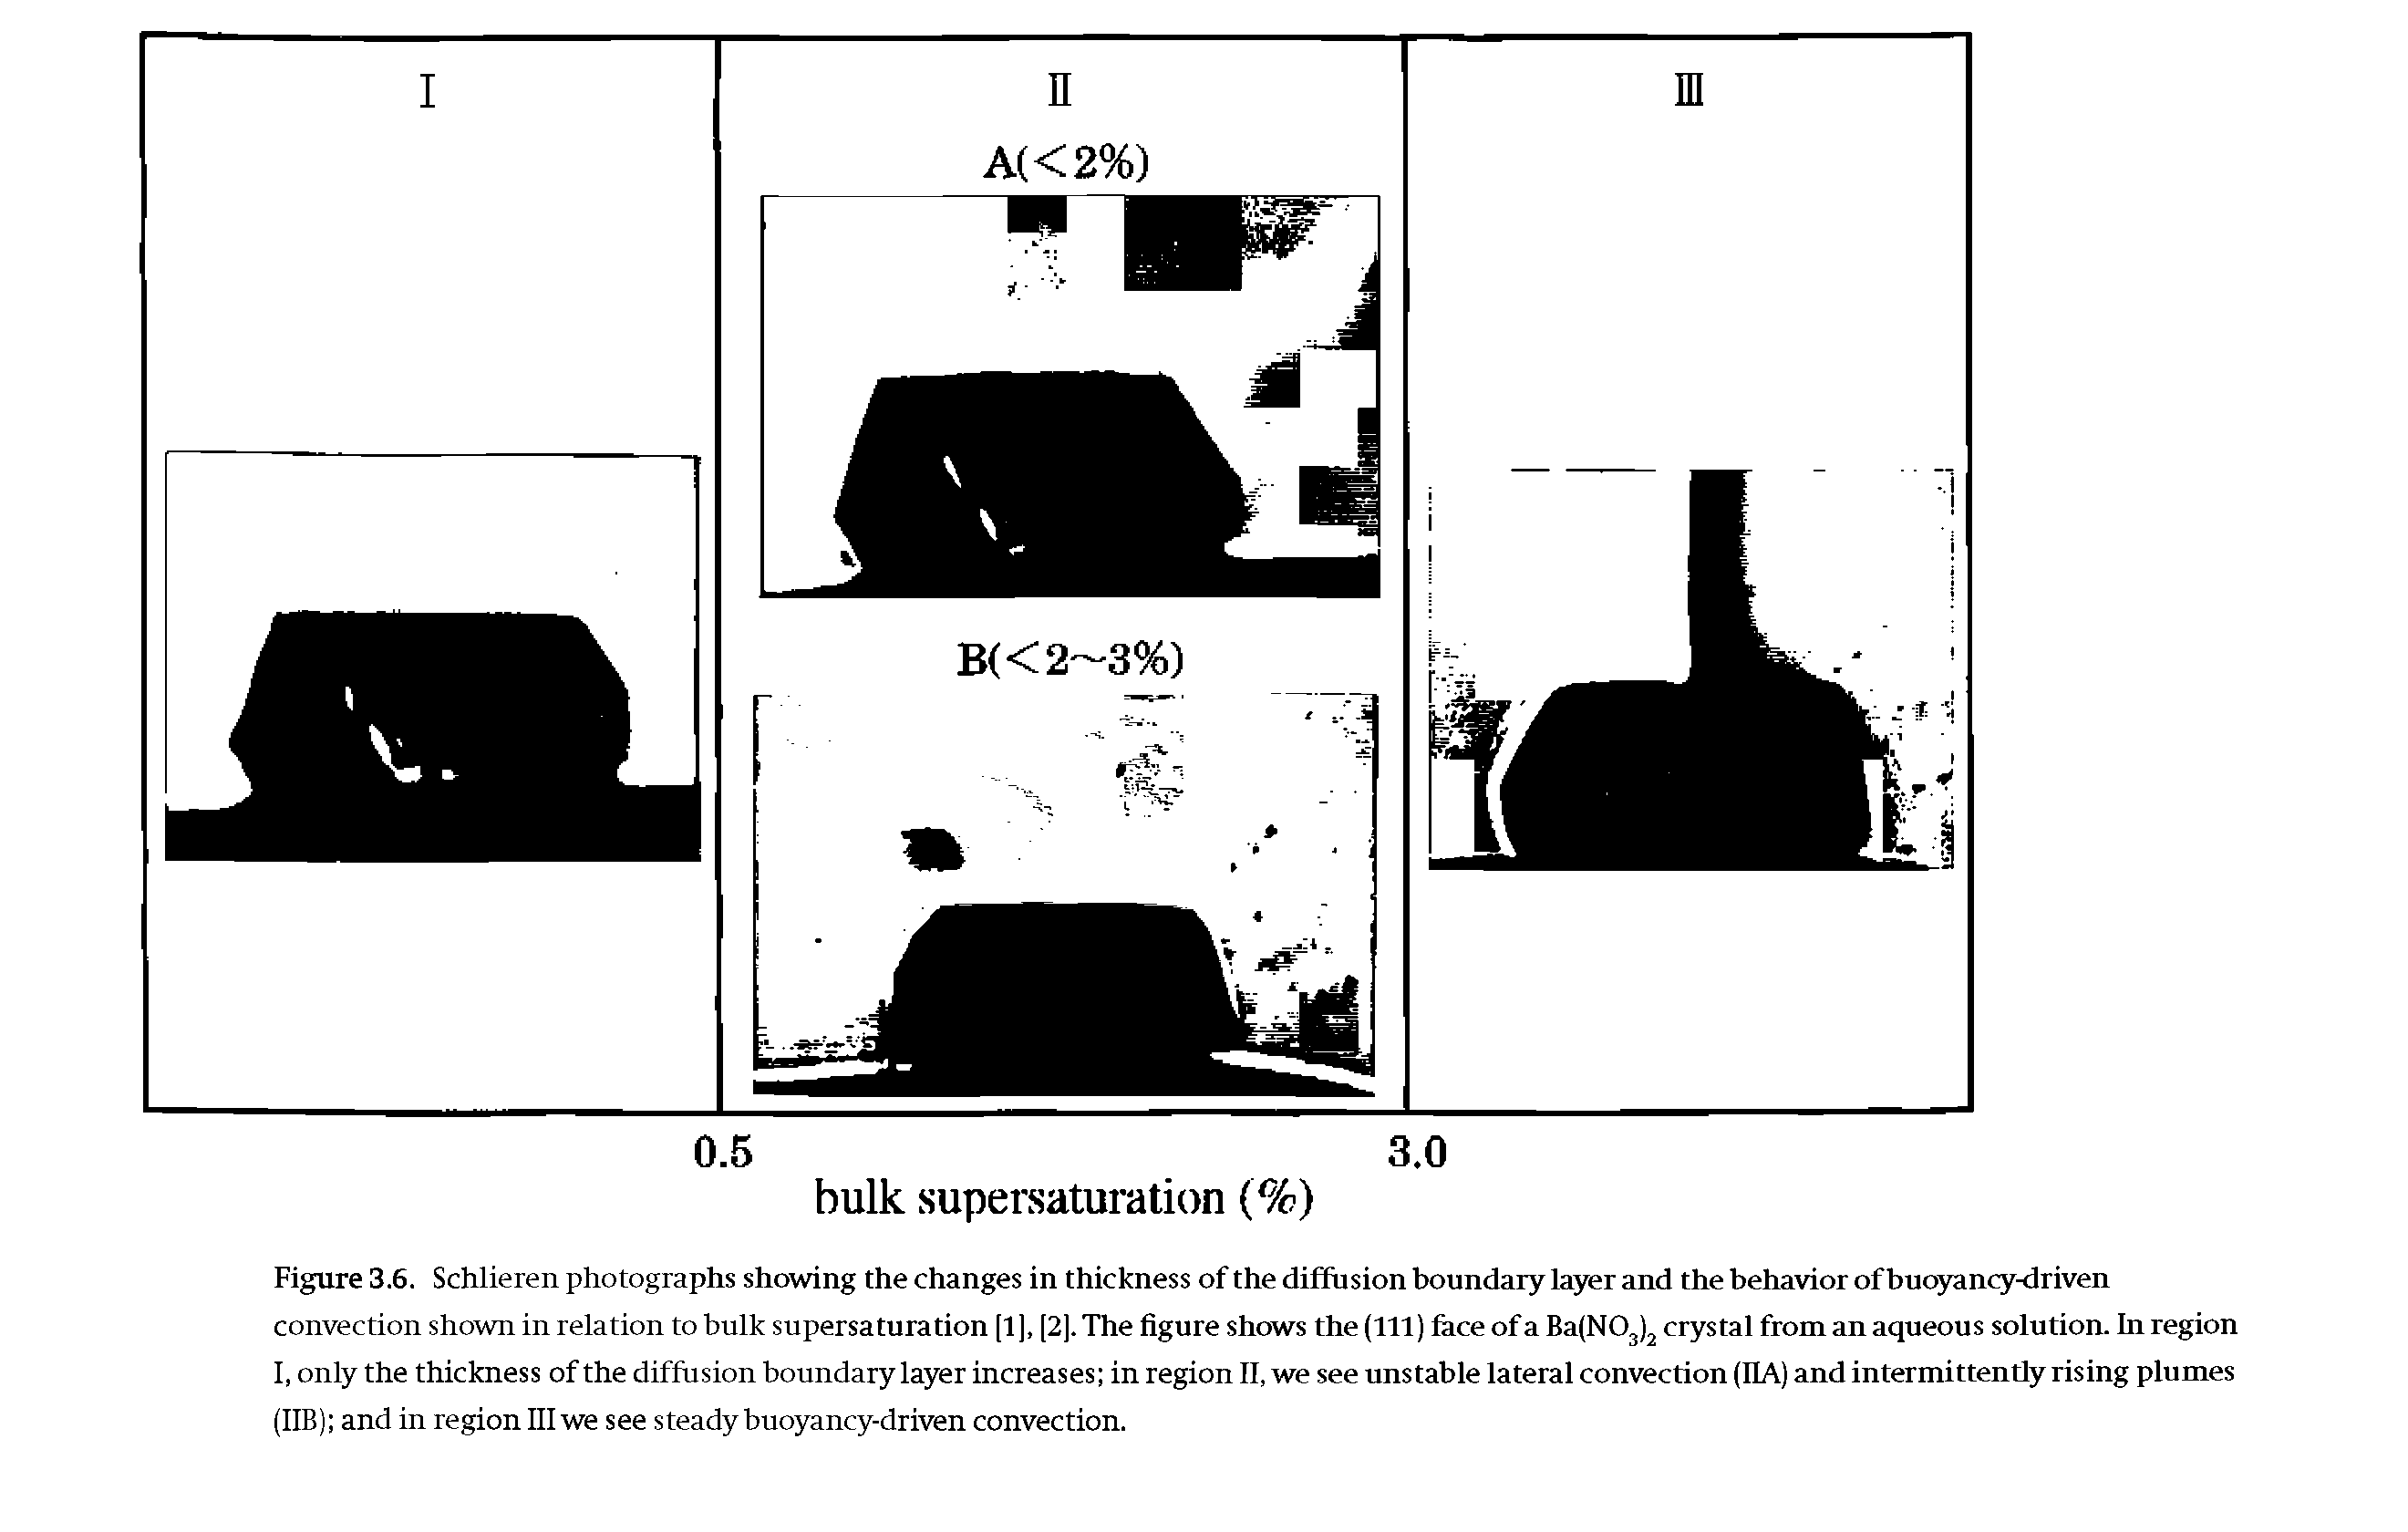 Figure 3.6. Schlieren photographs showing the changes in thickness of the diffusion boundary layer and the behavior of buoyancy-driven convection shown in relation to bulk supersaturation [1], [2]. The figure shows the (111) faceofaBa(N03)2 crystal from an aqueous solution. In region I, only the thickness of the diffusion boundary layer increases in region II, we see unstable lateral convection (HA) and intermittently rising plumes (IIB) and in region III we see steady buoyancy-driven convection.